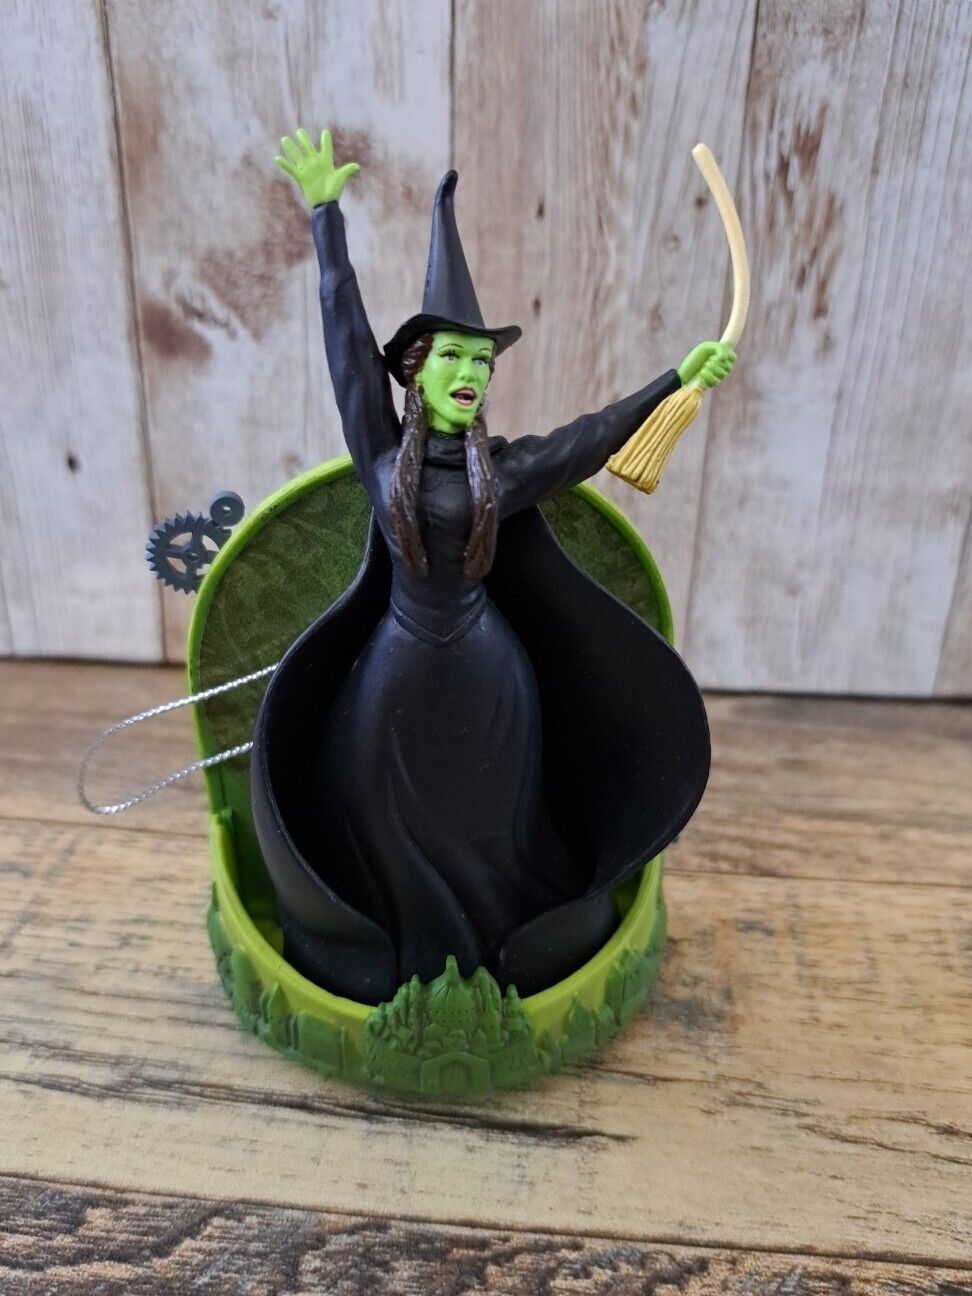 Wicked 2010 Heirloom Christmas Ornament Wicked Plays “Defying Gravity”